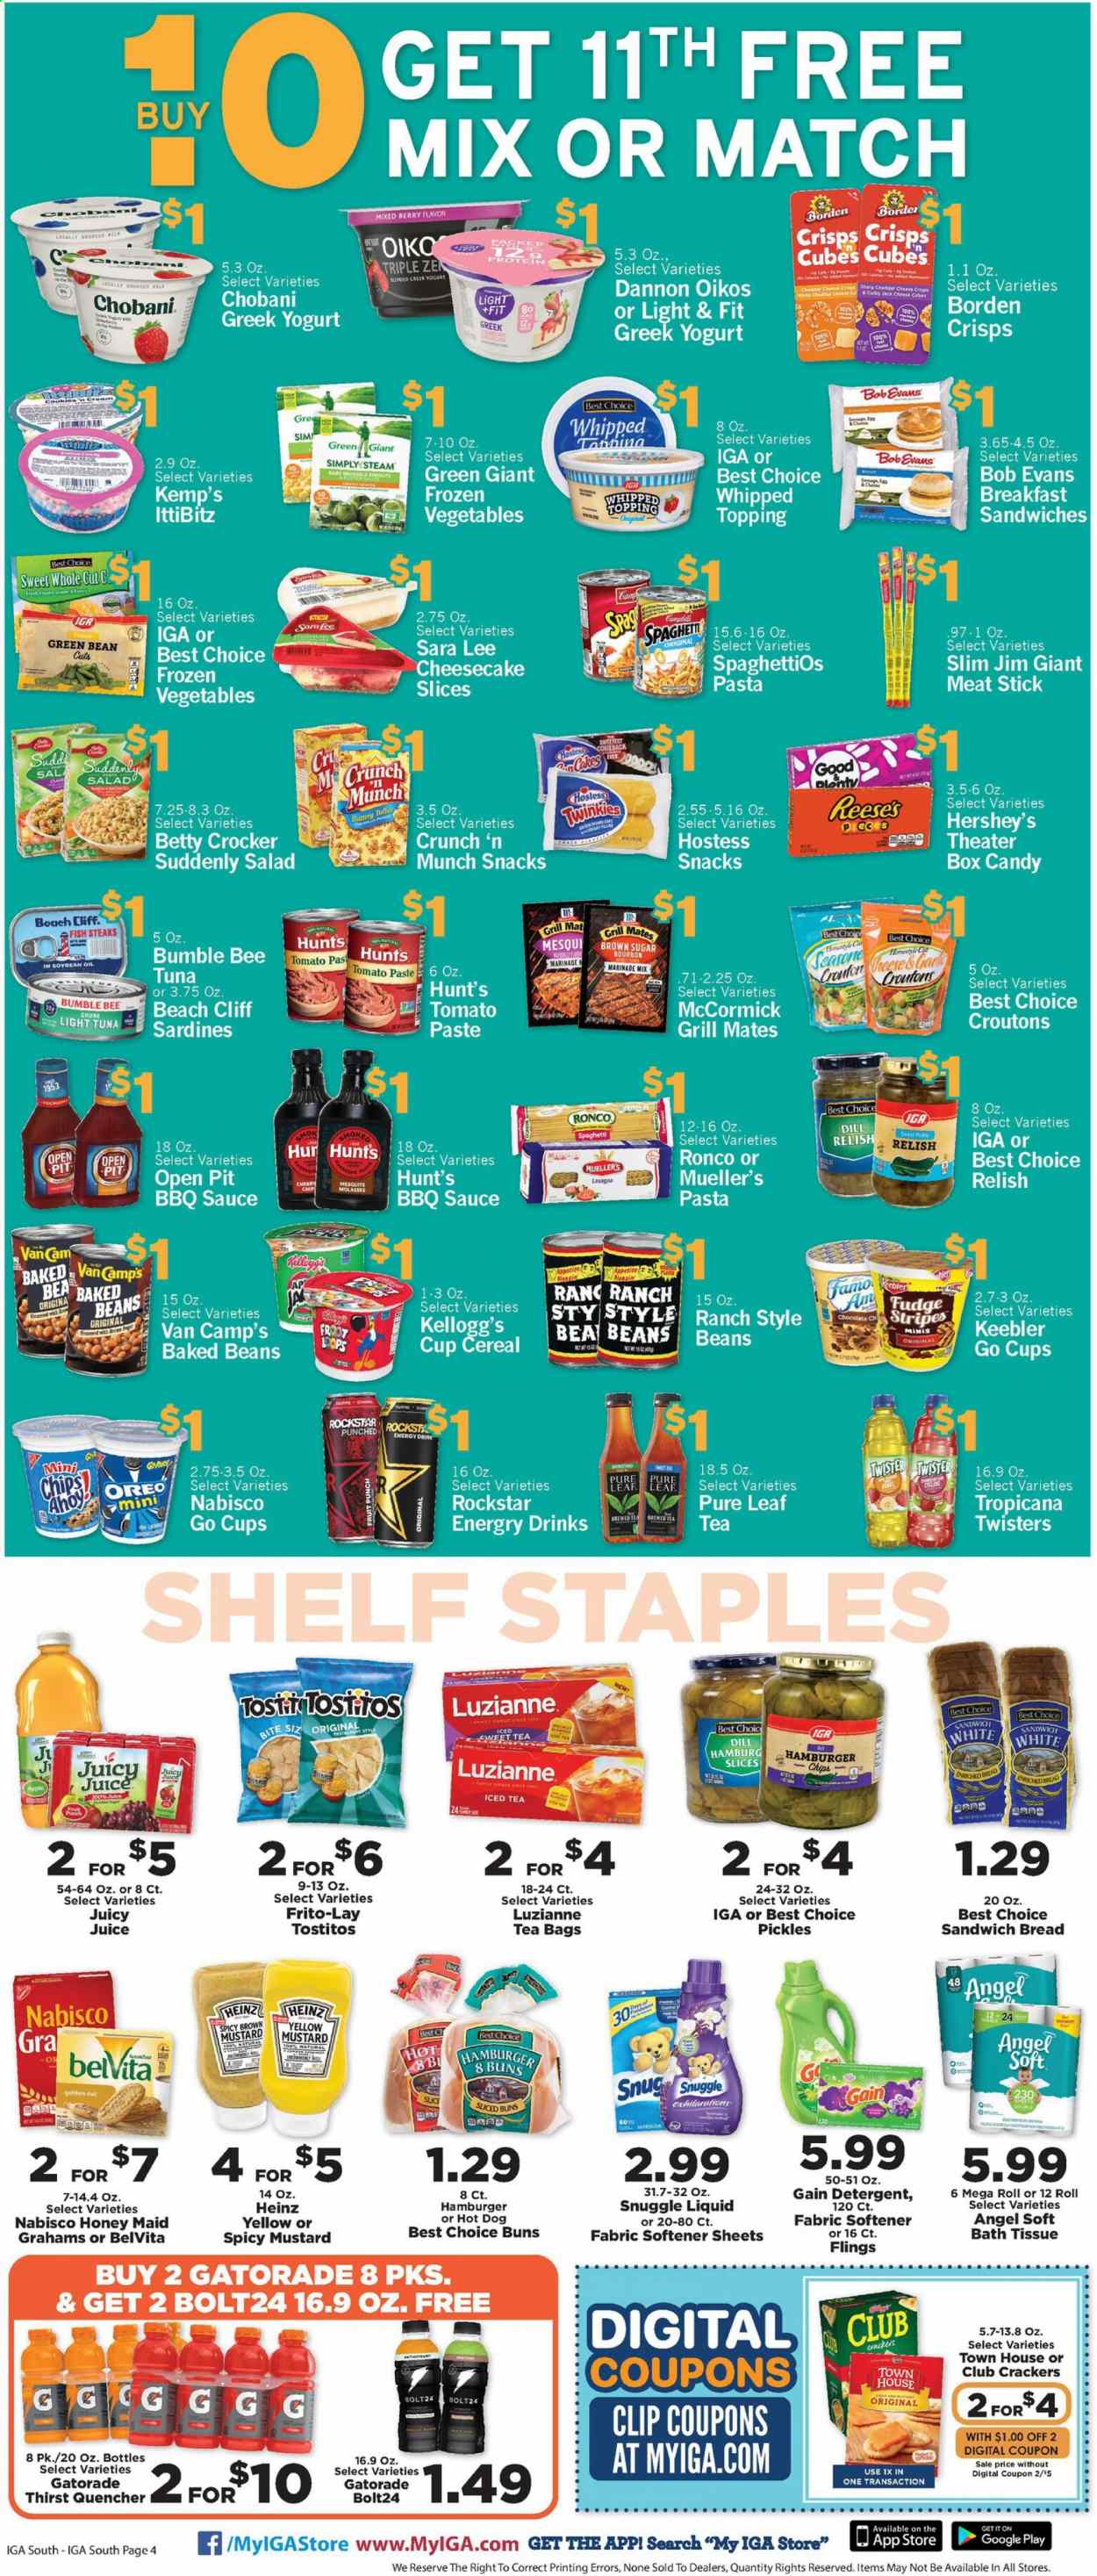 thumbnail - IGA Flyer - 06/23/2021 - 06/29/2021 - Sales products - bread, cake, buns, Sara Lee, cheesecake, beans, salad, sardines, tuna, fish, fish steak, spaghetti, hot dog, hamburger, pasta, Bumble Bee, sauce, lasagna meal, Bob Evans, sausage, Colby cheese, cheese, greek yoghurt, Oreo, yoghurt, Oikos, Chobani, Dannon, milk, Reese's, Hershey's, frozen vegetables, cookies, fudge, chocolate, snack, toffee, crackers, Kellogg's, Keebler, Frito-Lay, Tostitos, cane sugar, croutons, oats, topping, tomato paste, Heinz, pickles, light tuna, baked beans, cereals, belVita, Honey Maid, dill, BBQ sauce, mustard, marinade, soya oil, oil, molasses, juice, energy drink, Rockstar, Gatorade, fruit punch, tea bags, Pure Leaf, steak, bath tissue, detergent, Gain, Snuggle, fabric softener, cup. Page 4.